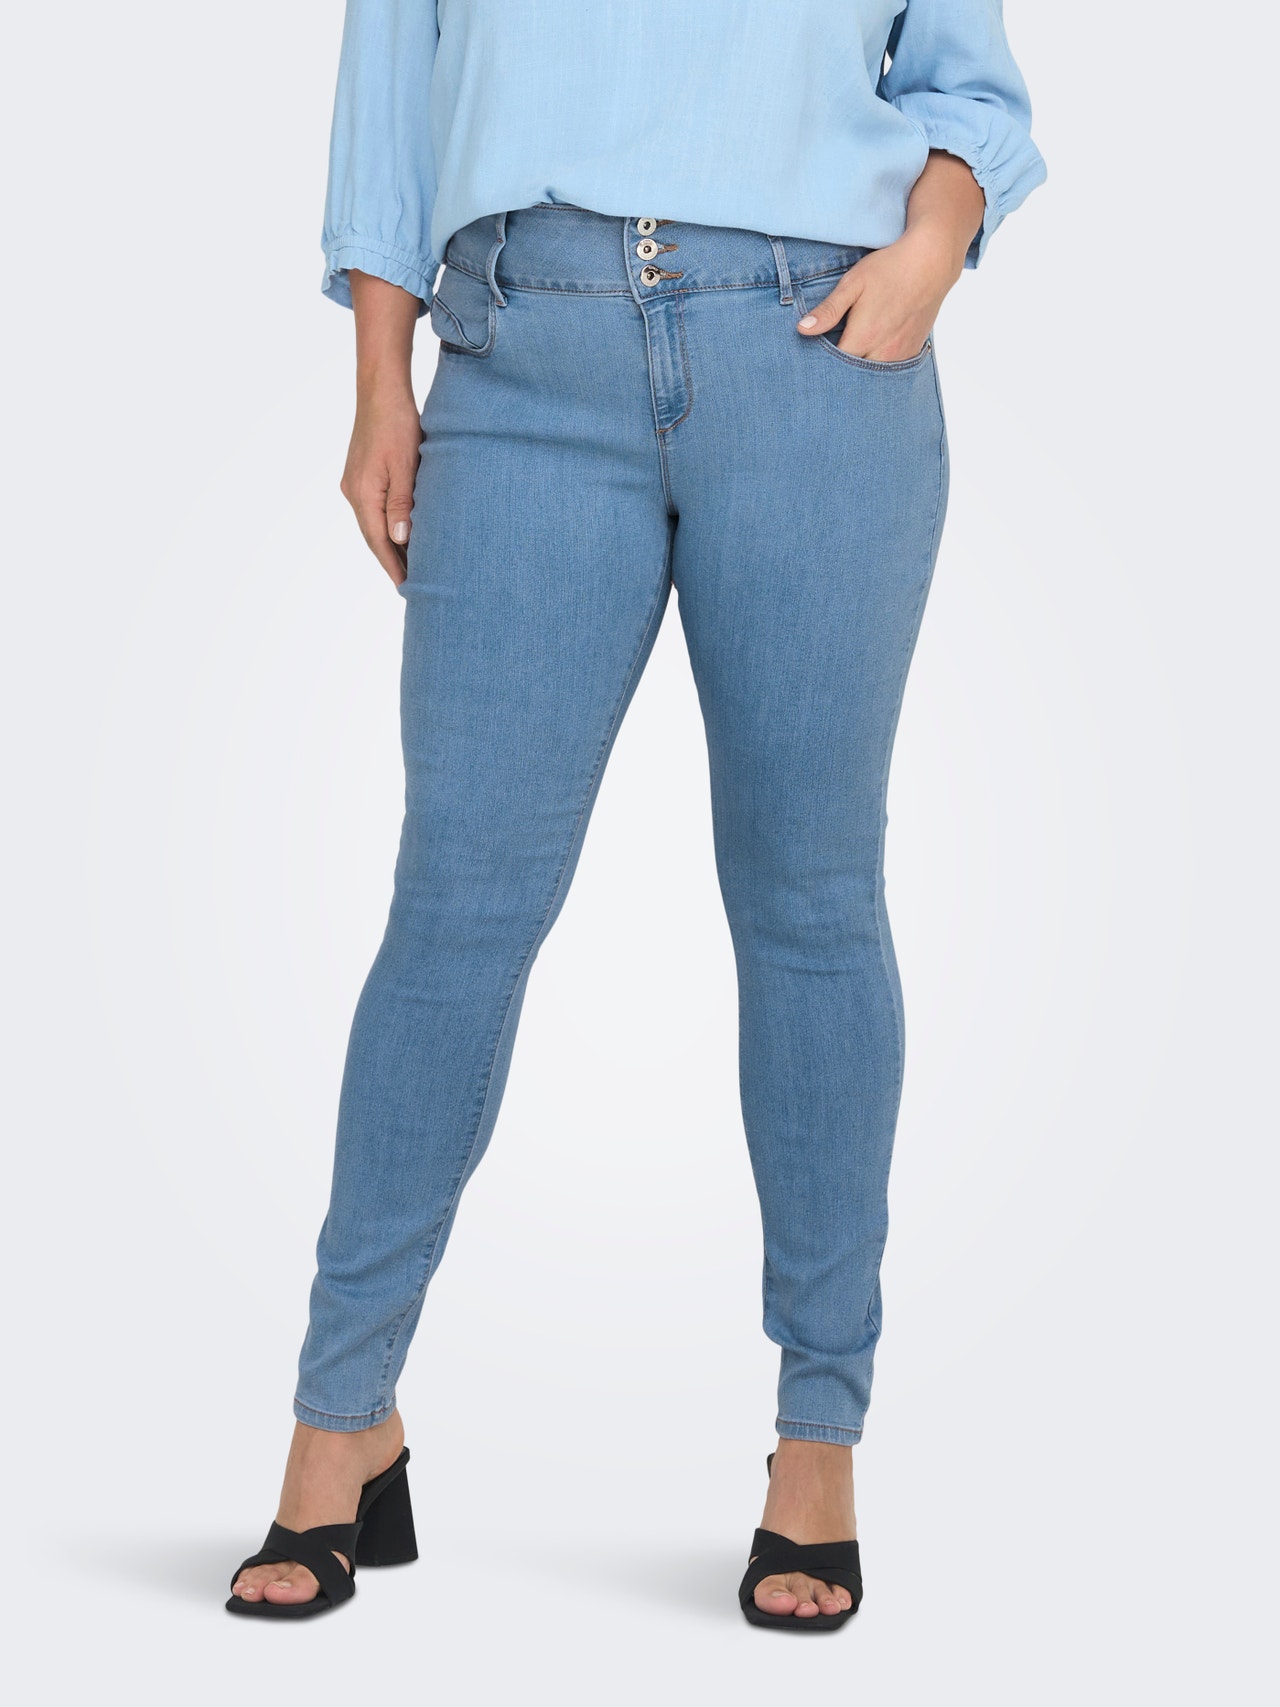 ONLY Skinny Fit Hohe Taille Jeans -Light Blue Denim - 15280926